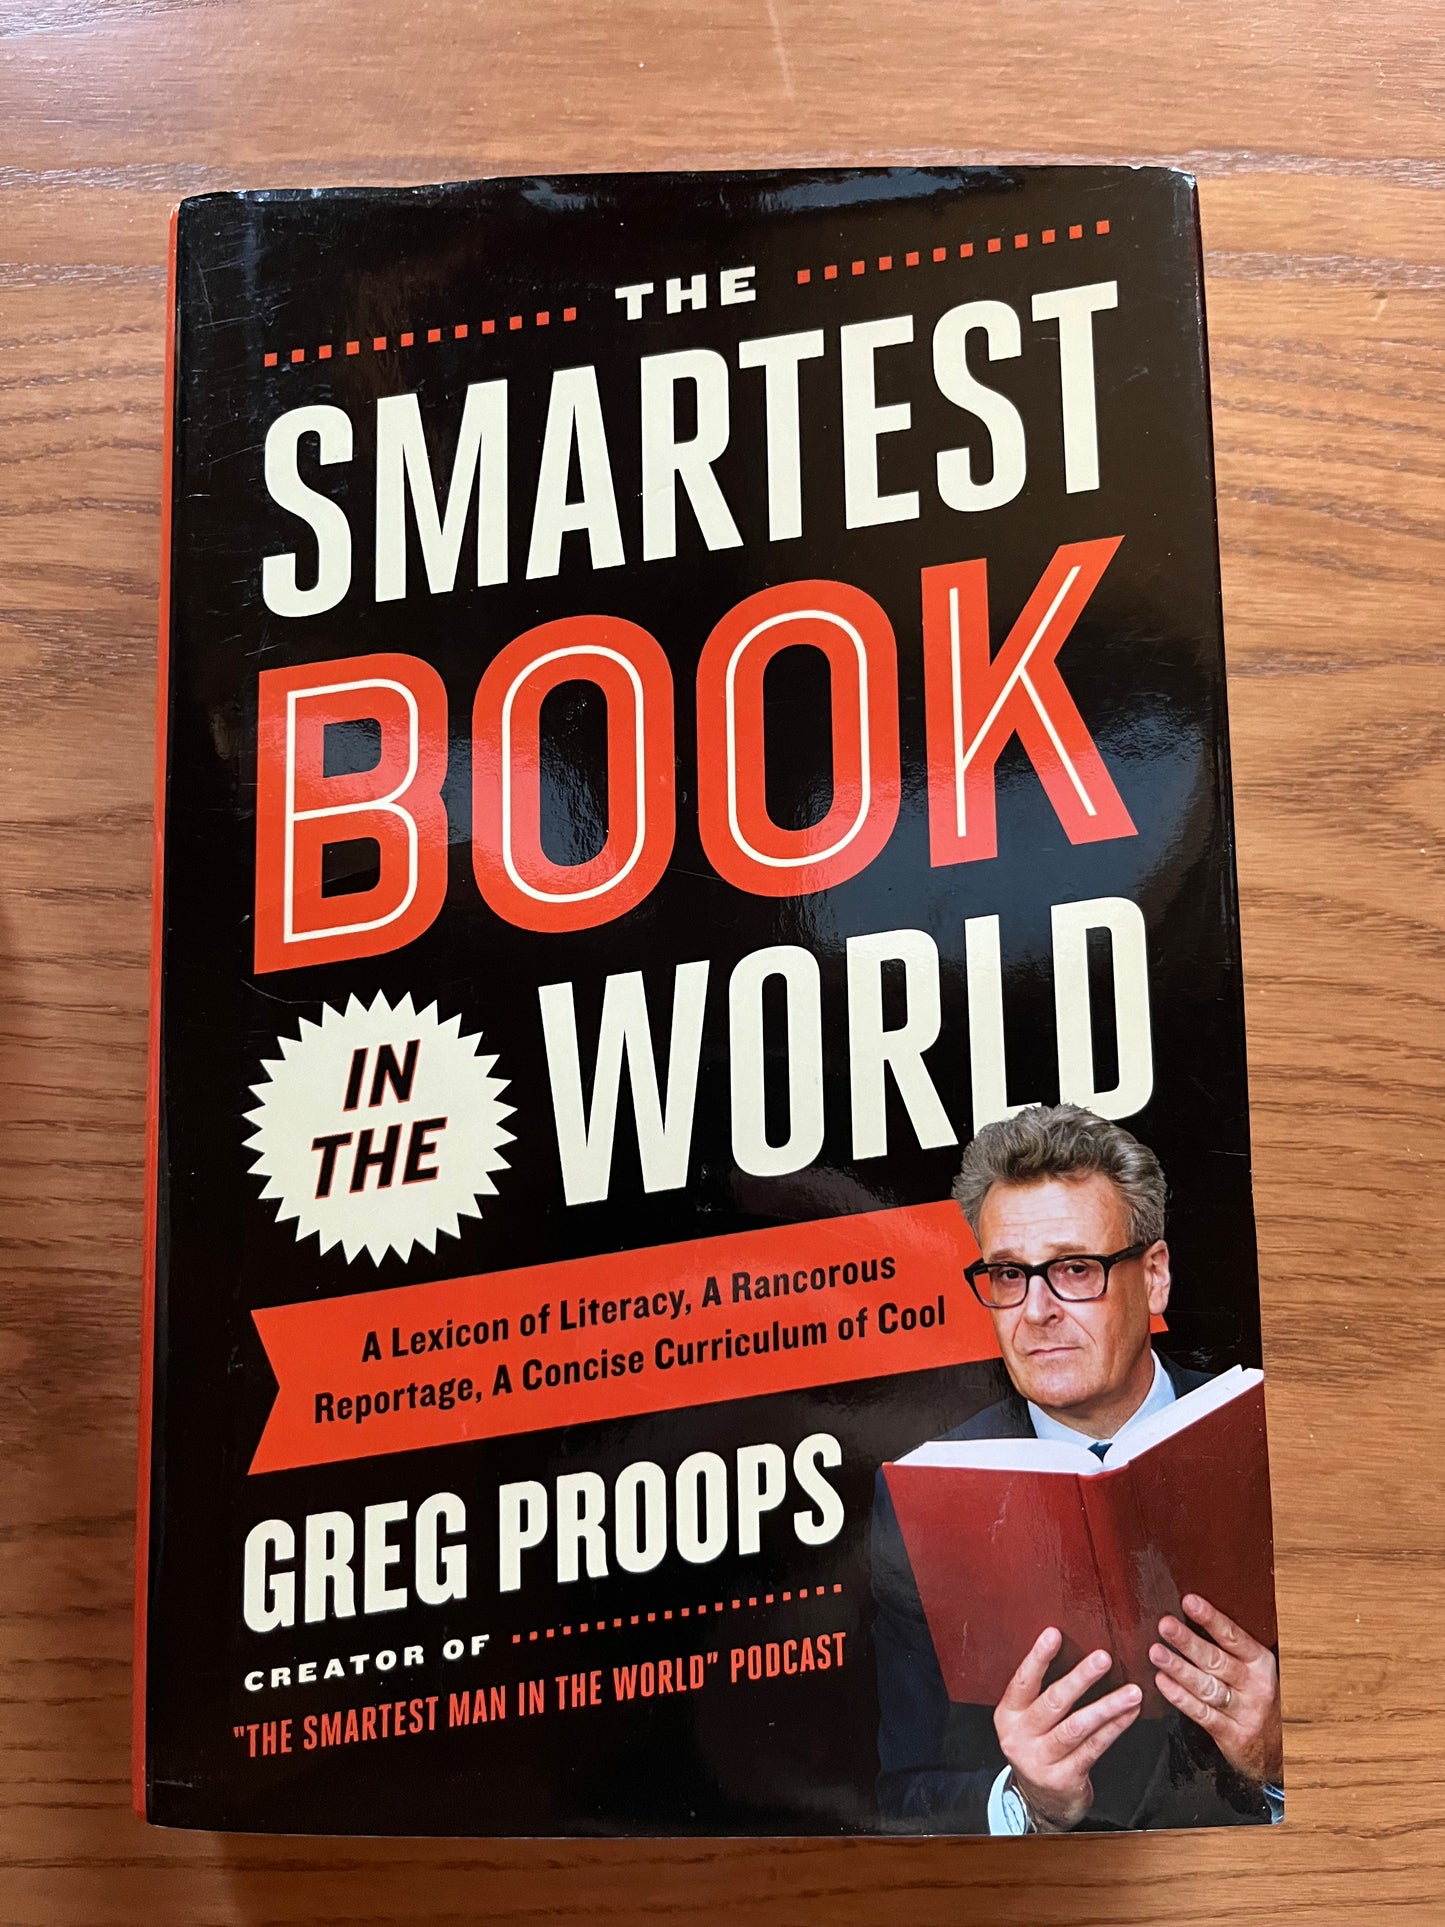 GREG PROOPS, Smartest Book in the World (autographed book)